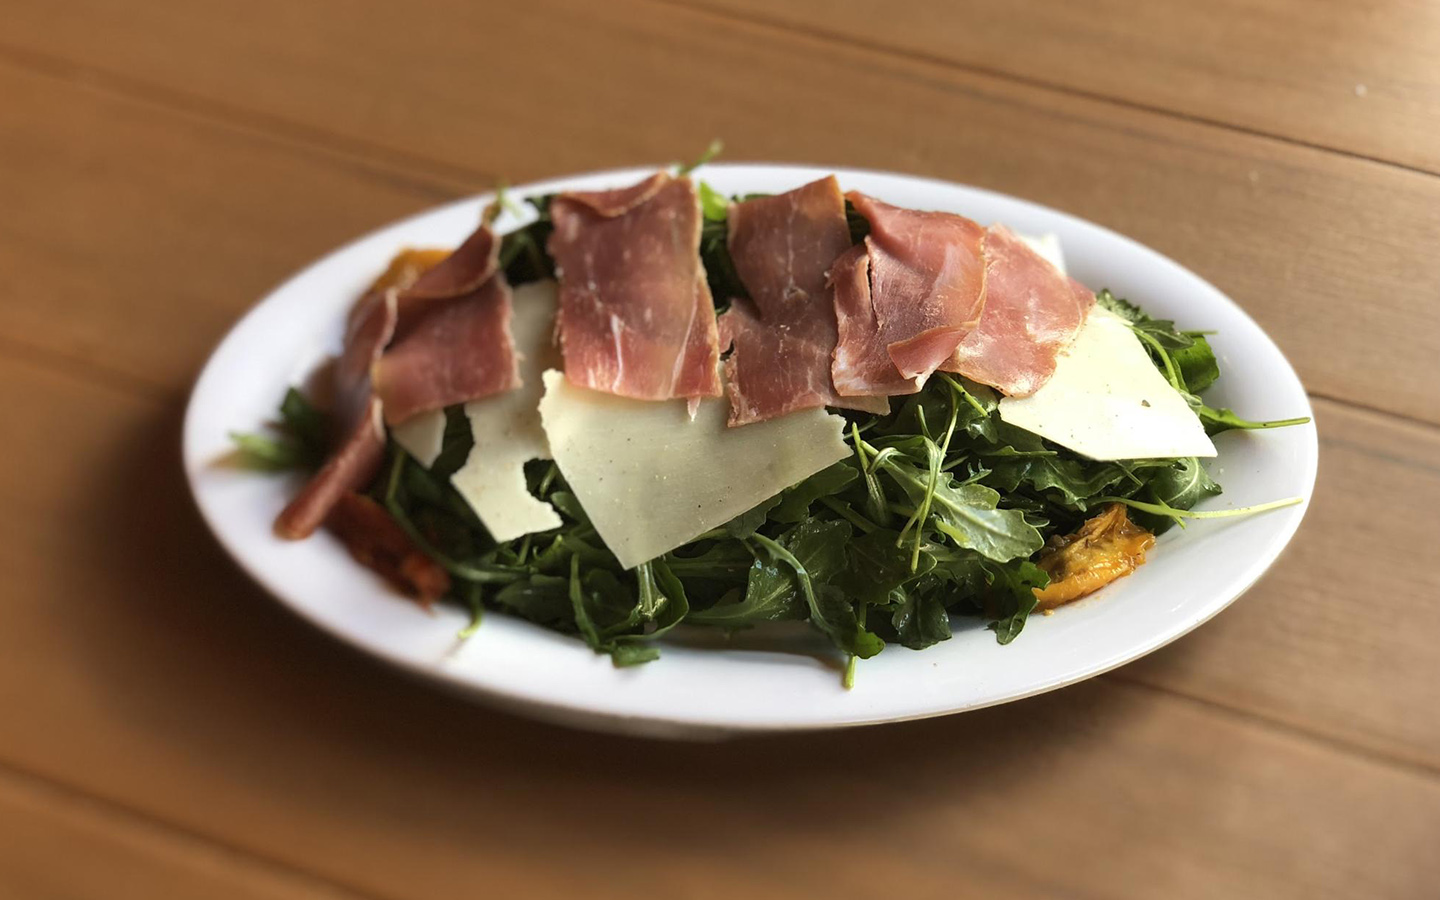 Prosciutto and Arugula Salad at Red Oven Pizza Bakery